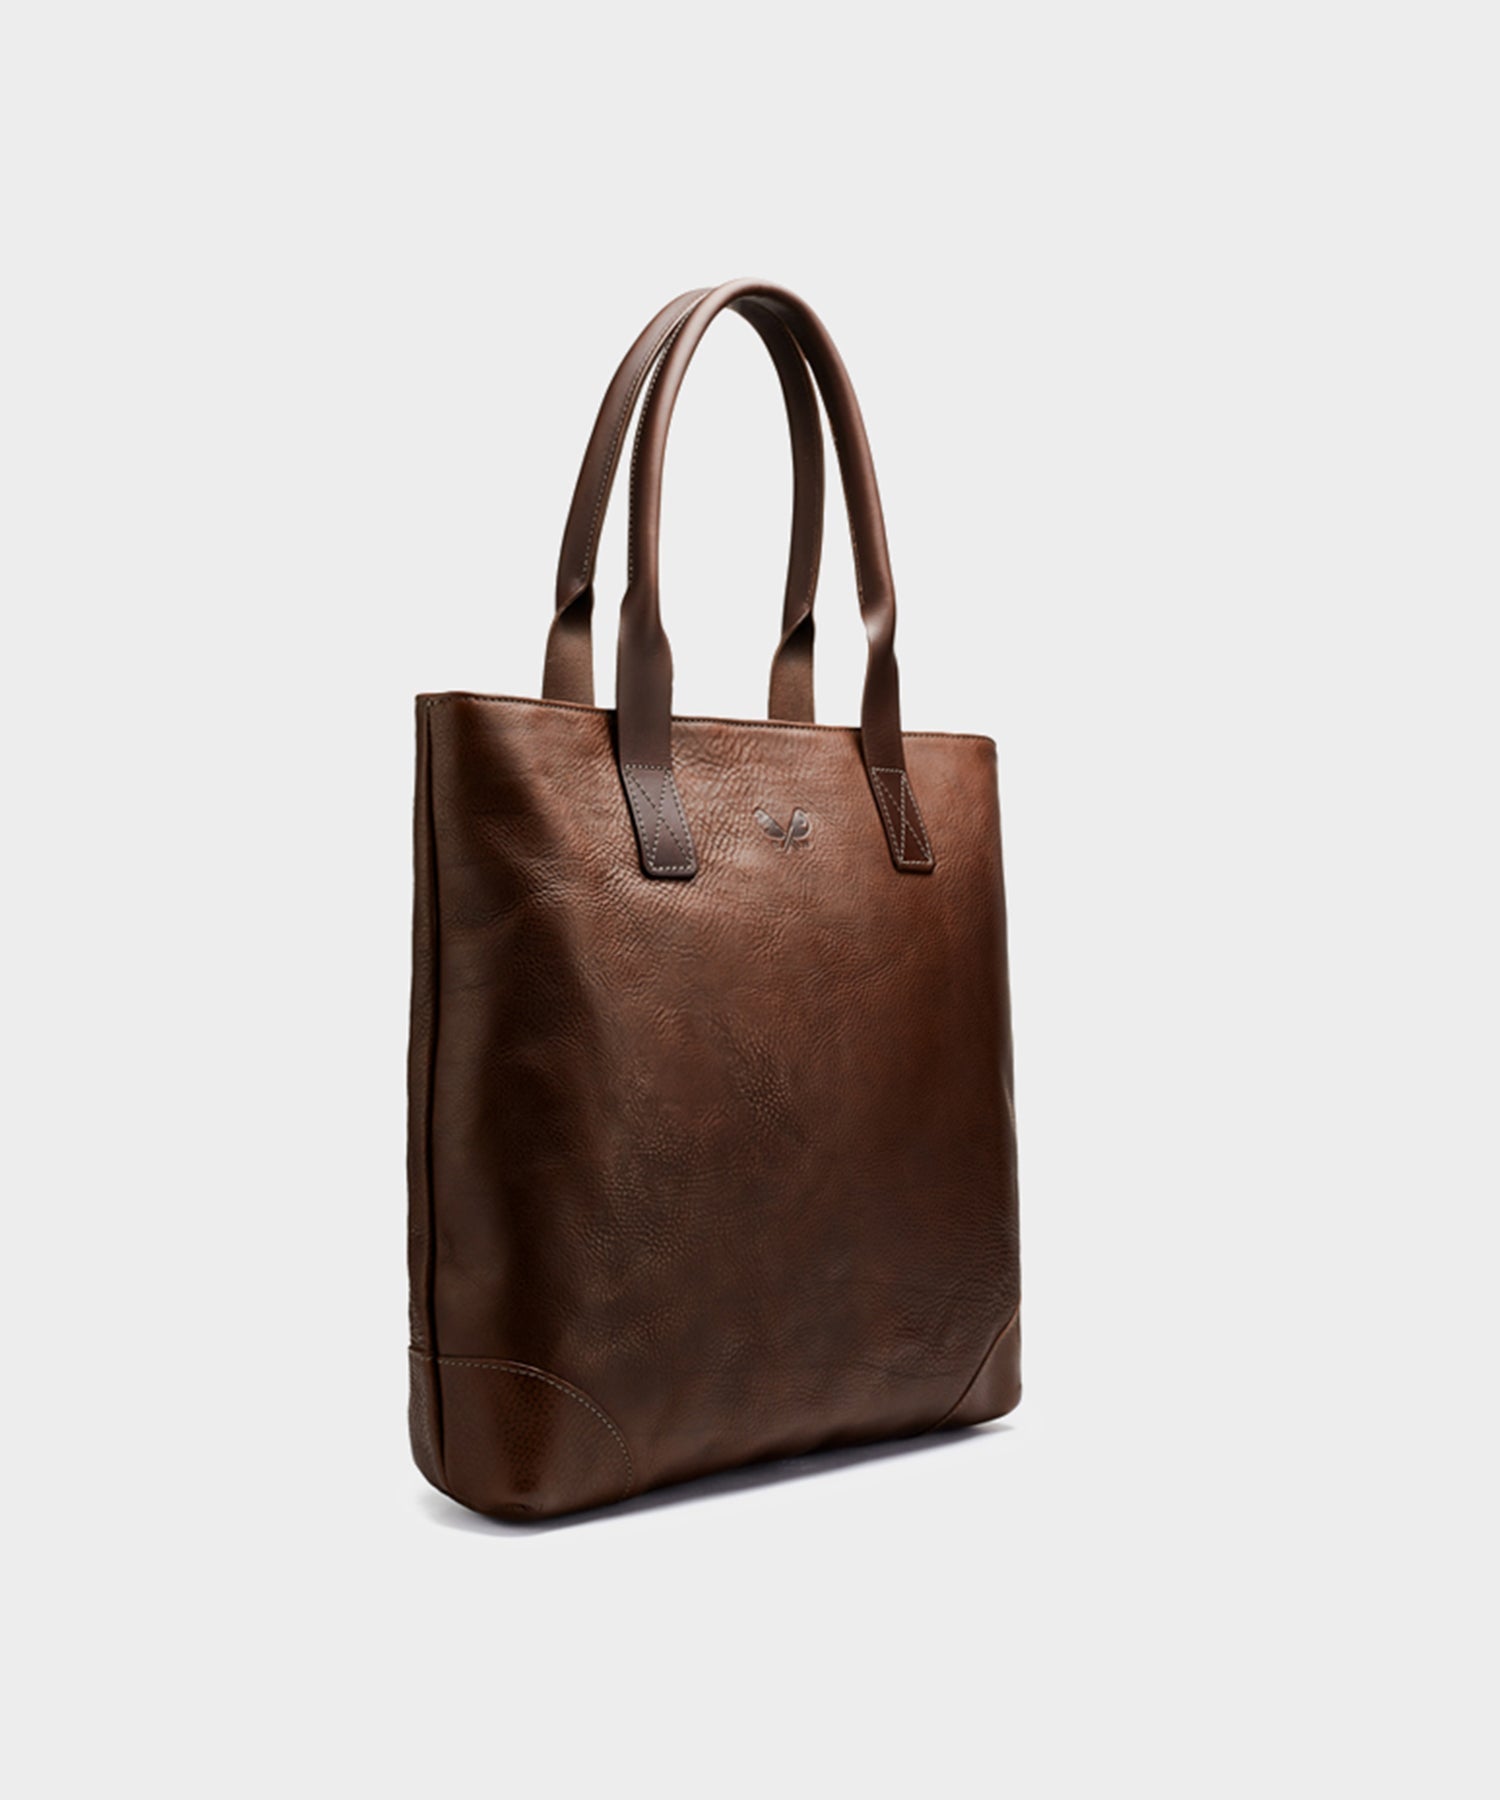 Bennett Winch Leather Tote in Brown